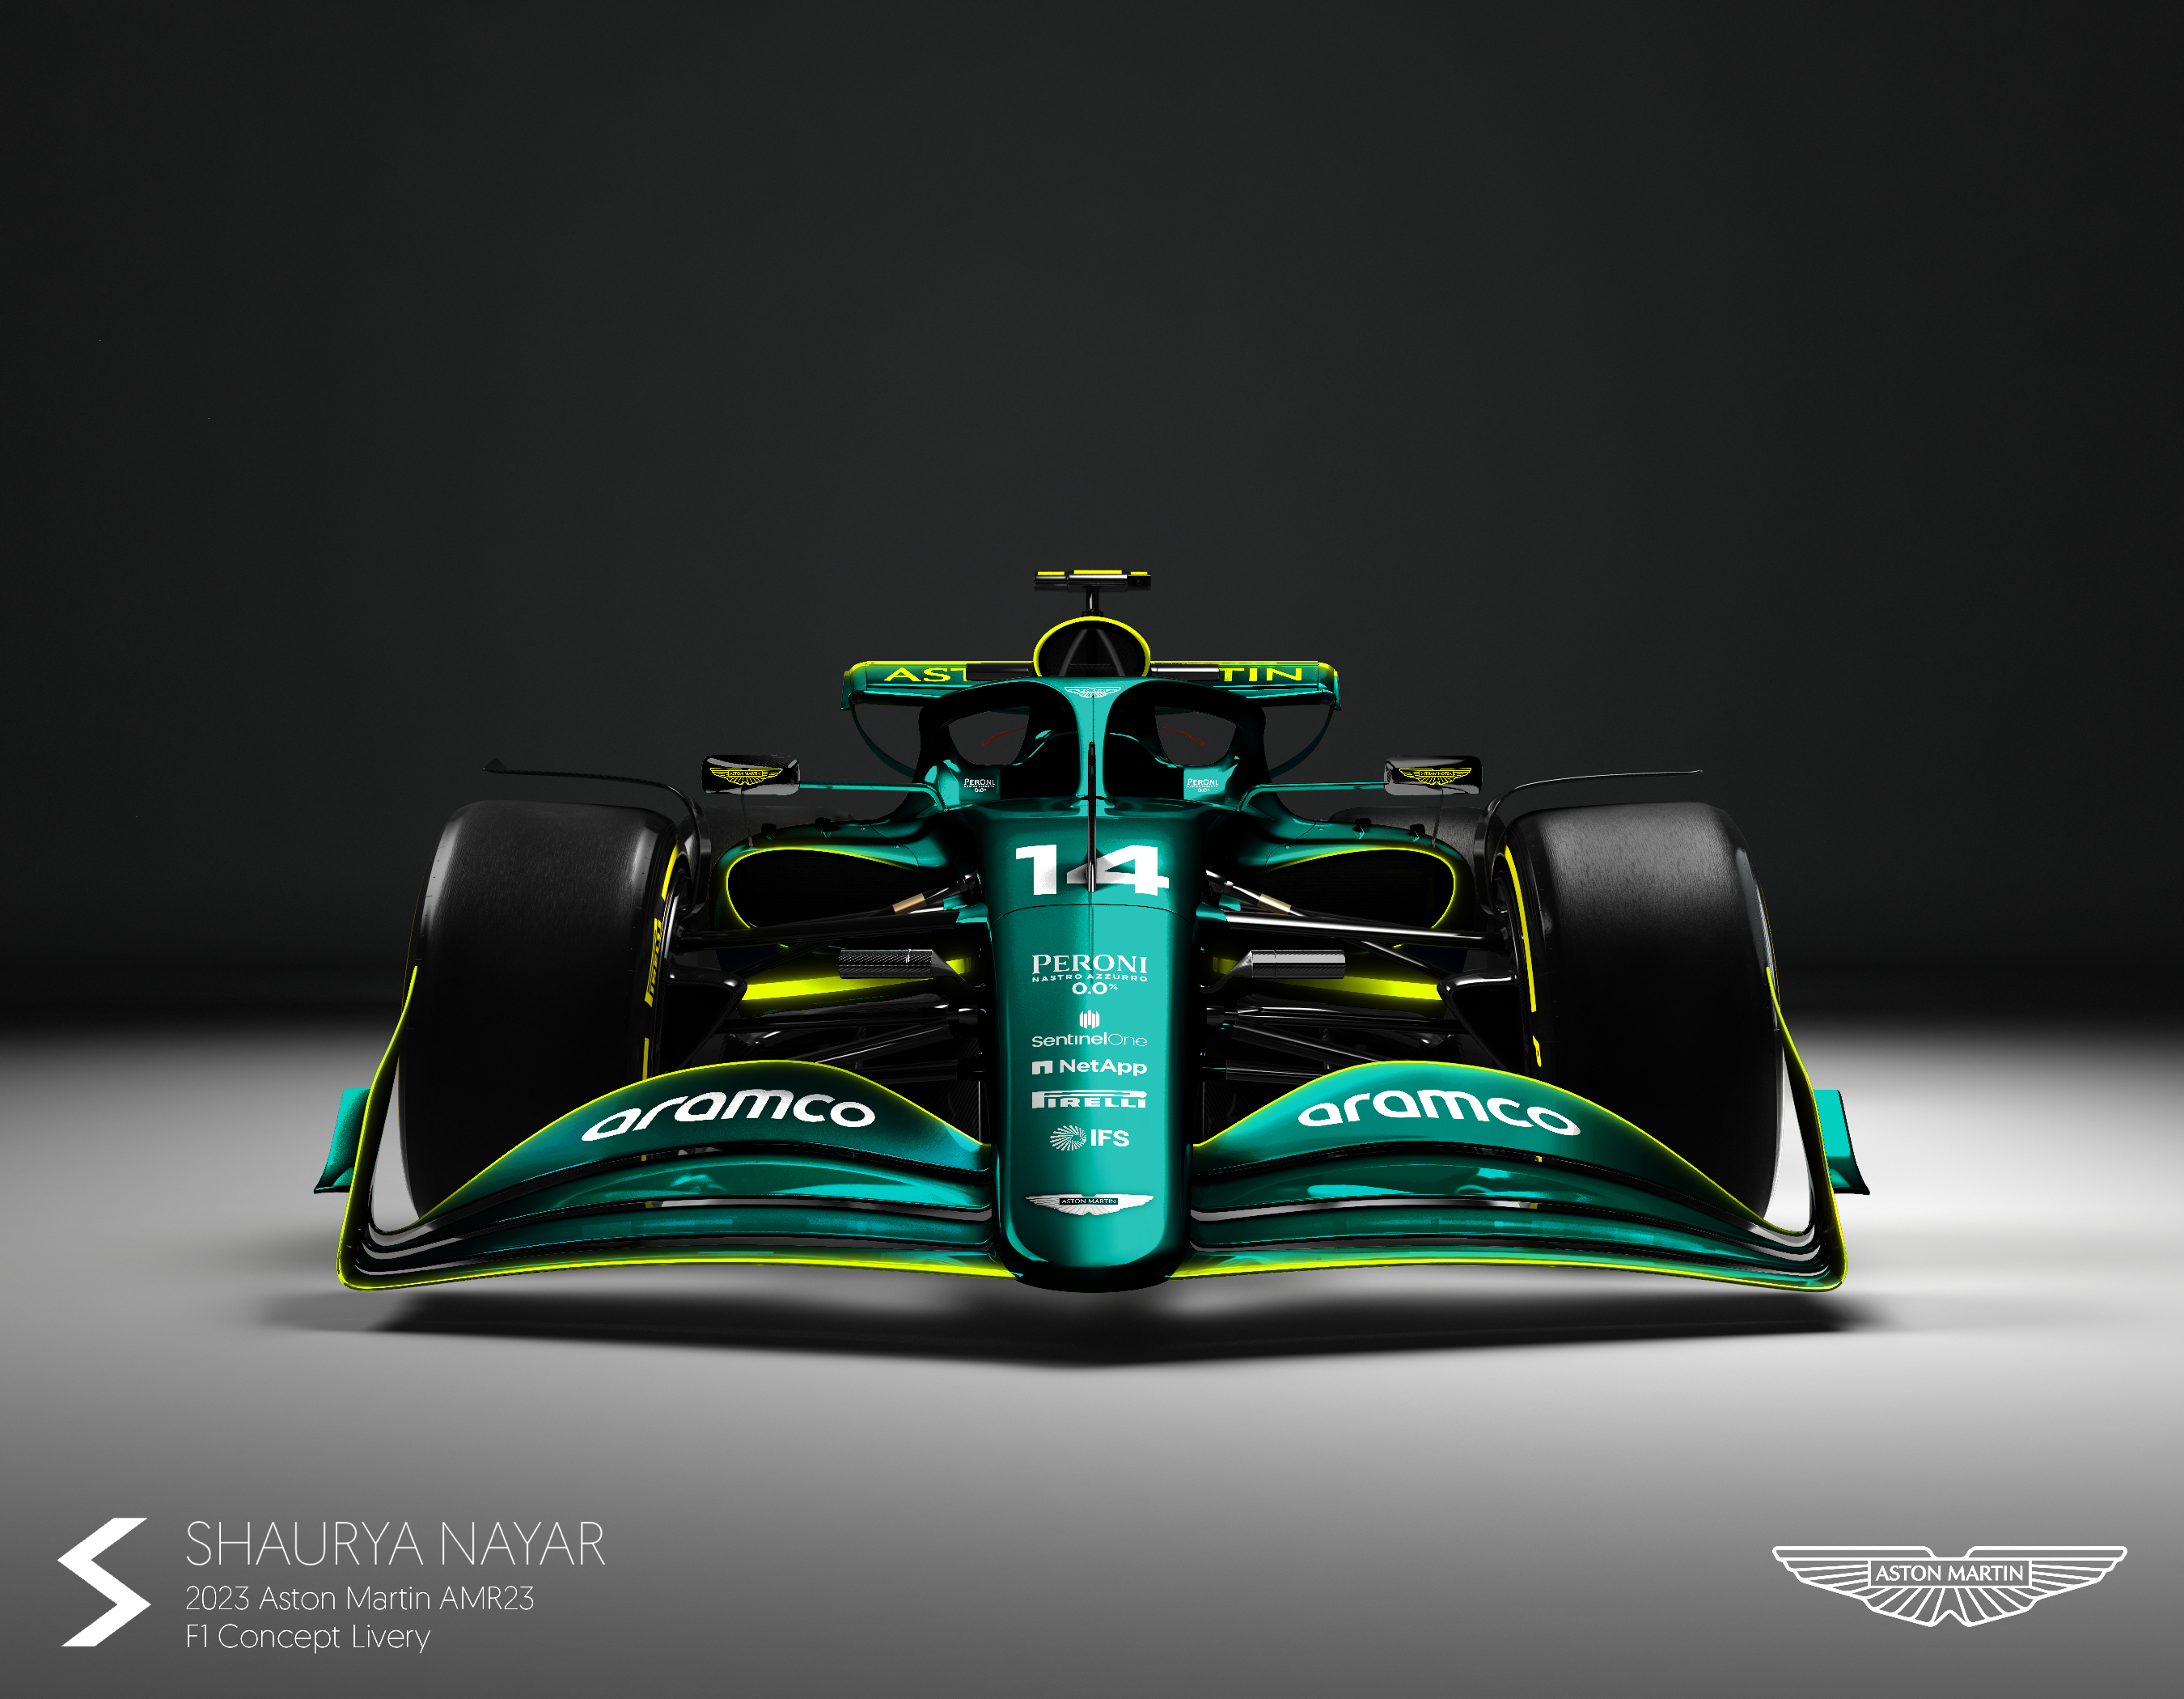 My 2023 Aston Martin AMR23 F1 concept livery. An evolution of an already fantastic 2022 livery. I hope you like it!